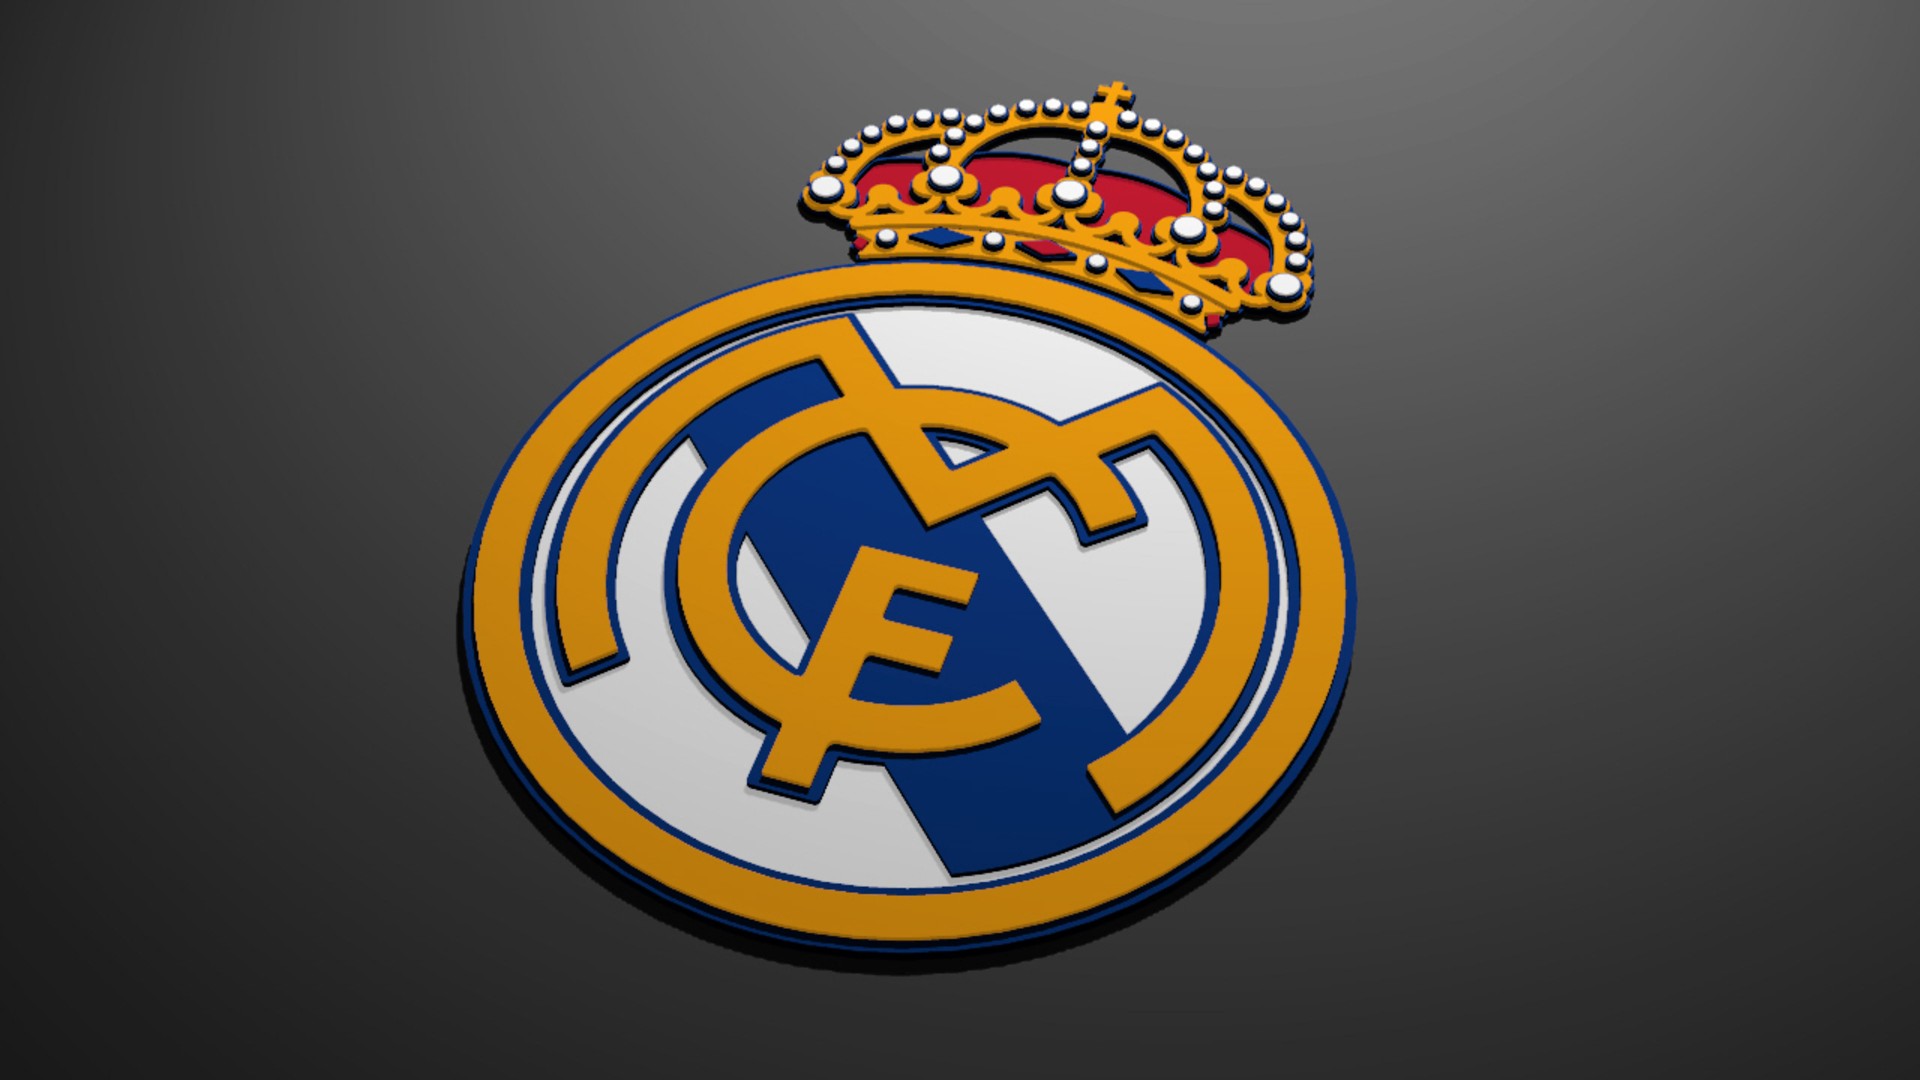 Real Madrid Desktop Wallpapers With Resolution 1920X1080 pixel. You can make this wallpaper for your Mac or Windows Desktop Background, iPhone, Android or Tablet and another Smartphone device for free